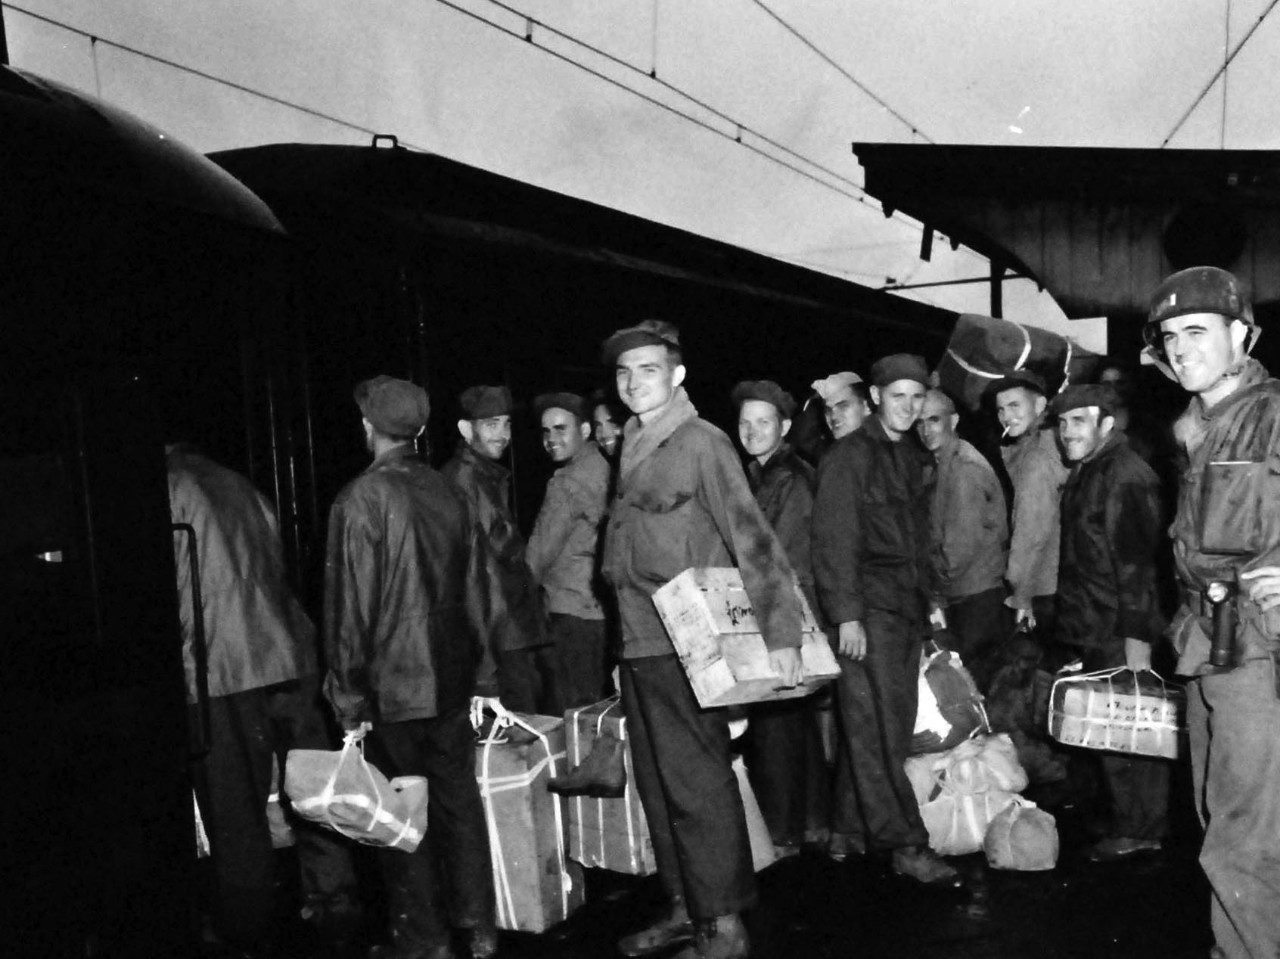 80-G-339424:  Prisoner of War Camp, Ofuna, Yokohama, Japan, 1945.   Liberated American Prisoners of War leave Ofuna prison camp by train bound for Atsugi, September 1, 1945.   Ofuna was located at Kamakura, Japan, just outside of Yokohama.   Photographed by Photographer’s Mate Cates.   Official U.S. Navy photograph, now in the collection of the National Archives.  (2013/08/14).    Note, the original photograph is about 1” x 1” in size.   